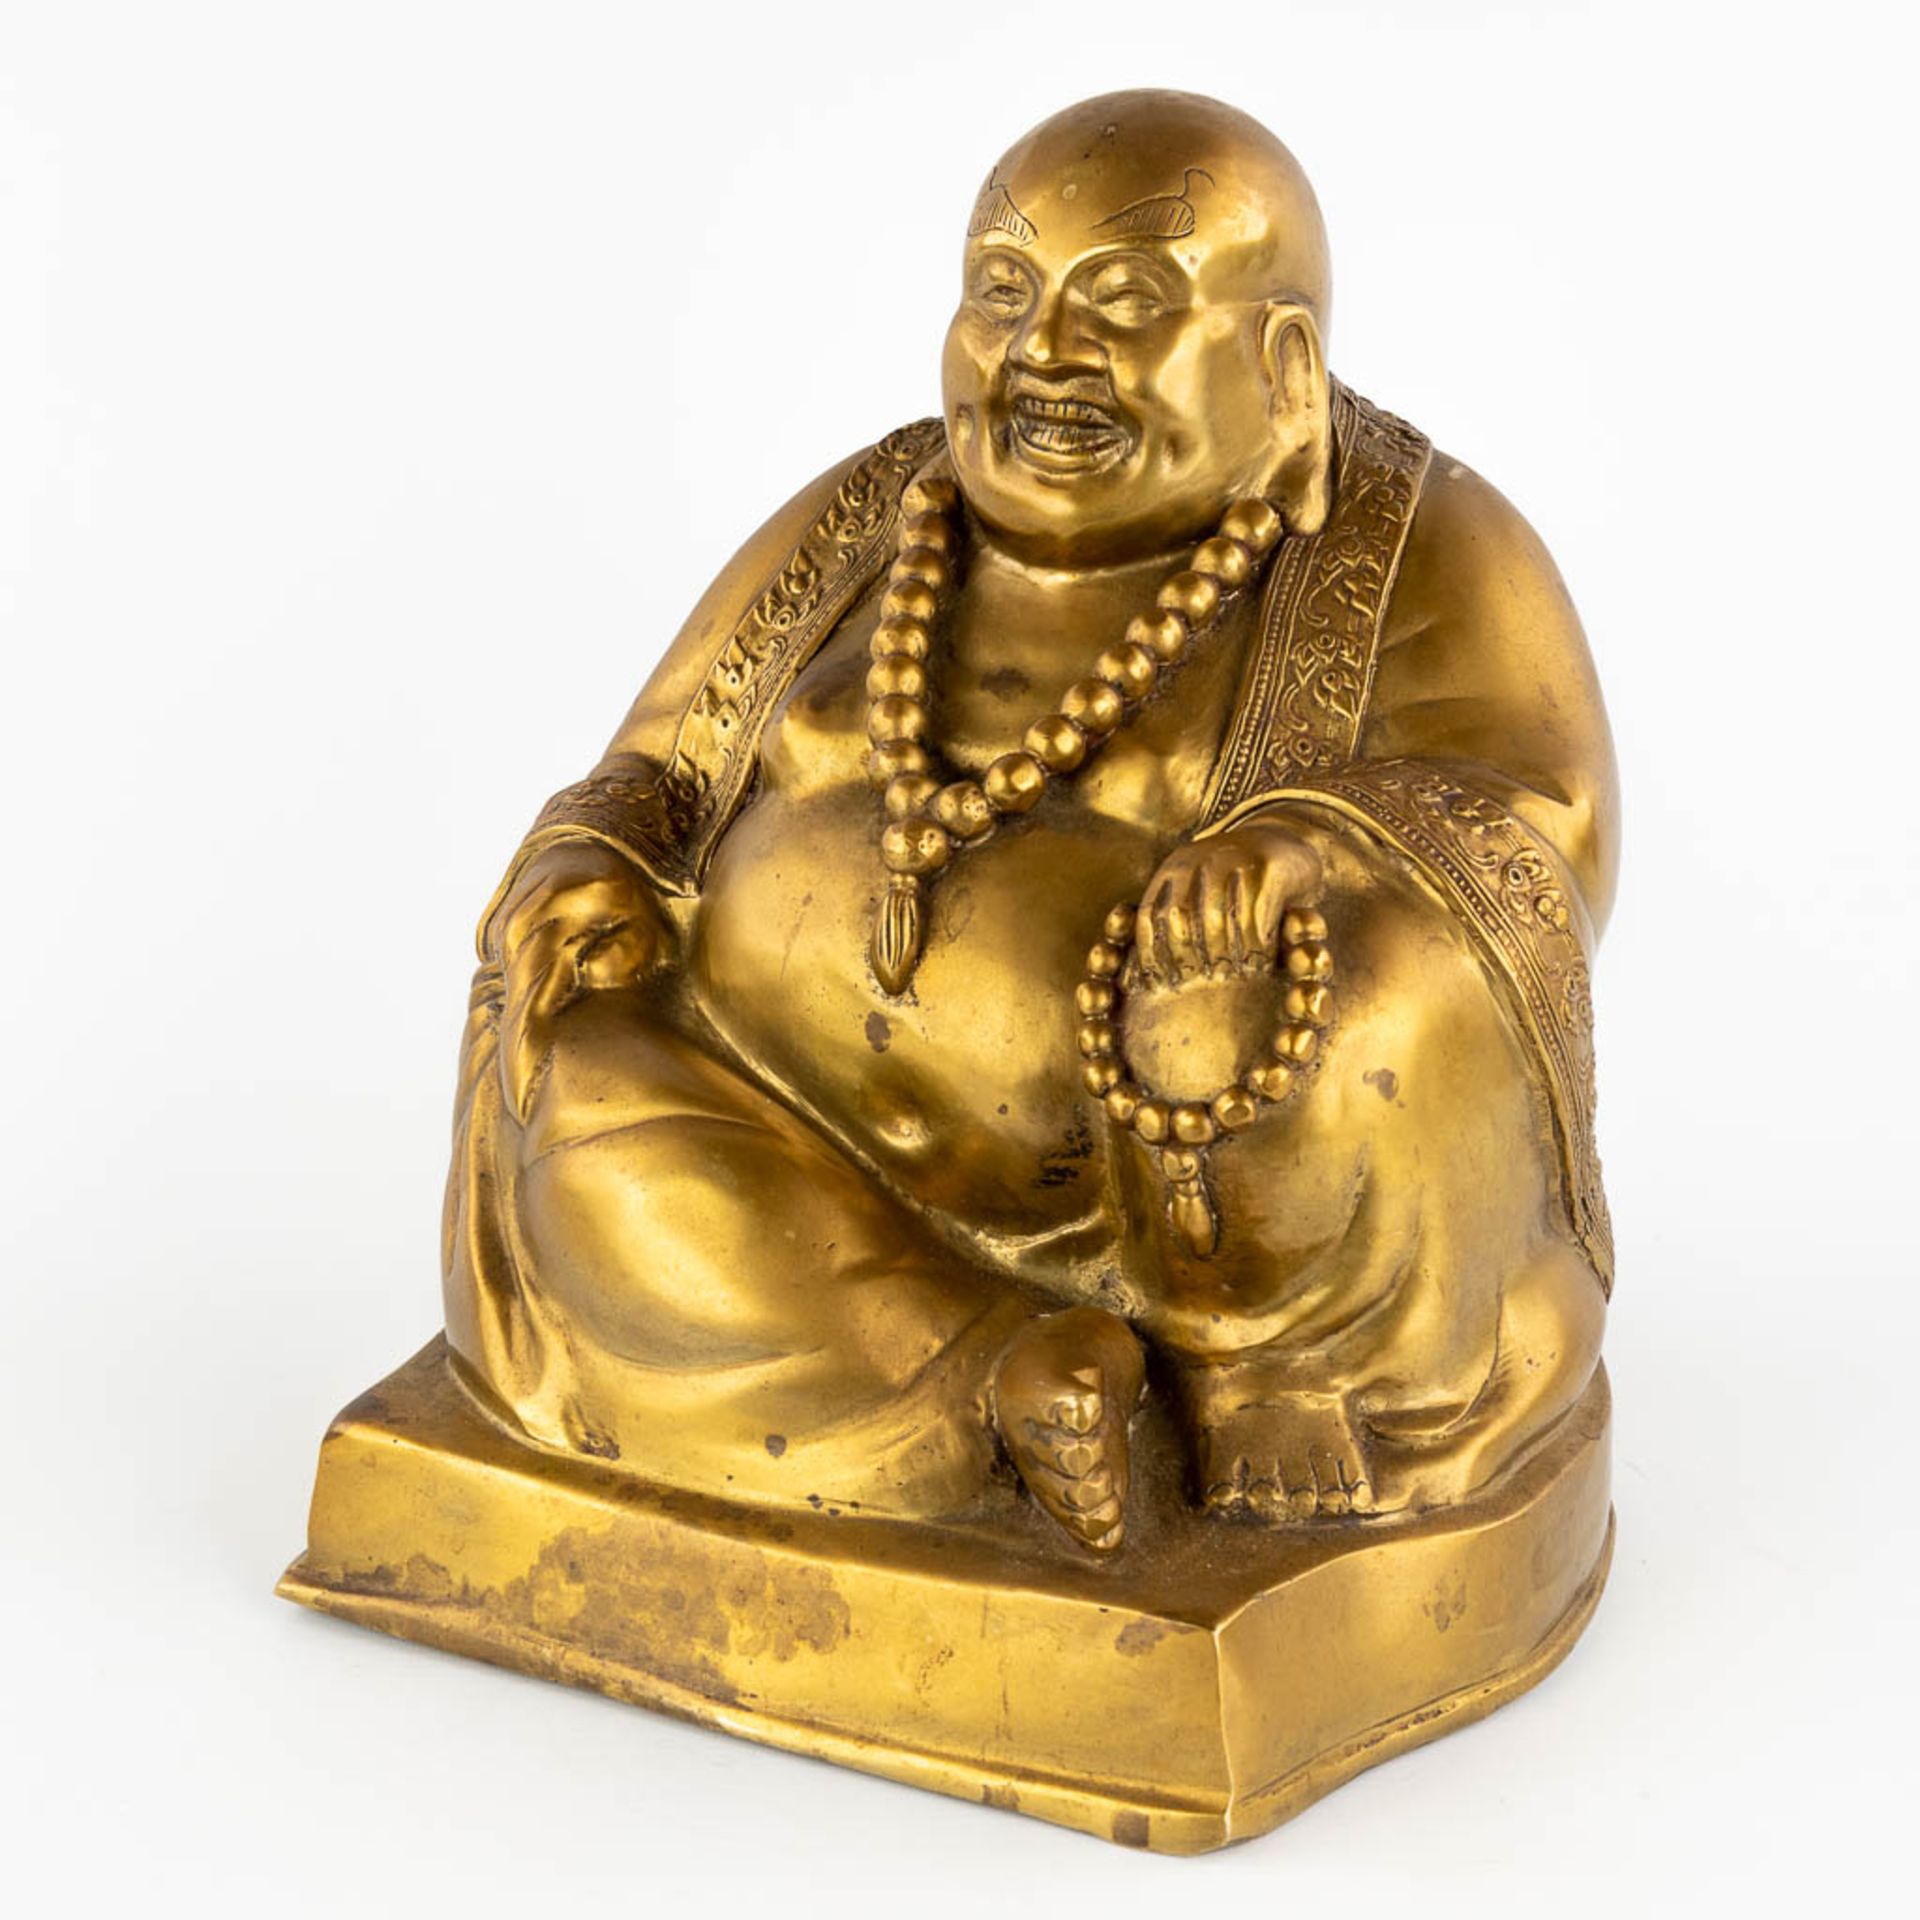 A Chinese laughing buddha, polished bronze. (L:27 x W:27 x H:34 cm) - Image 7 of 11